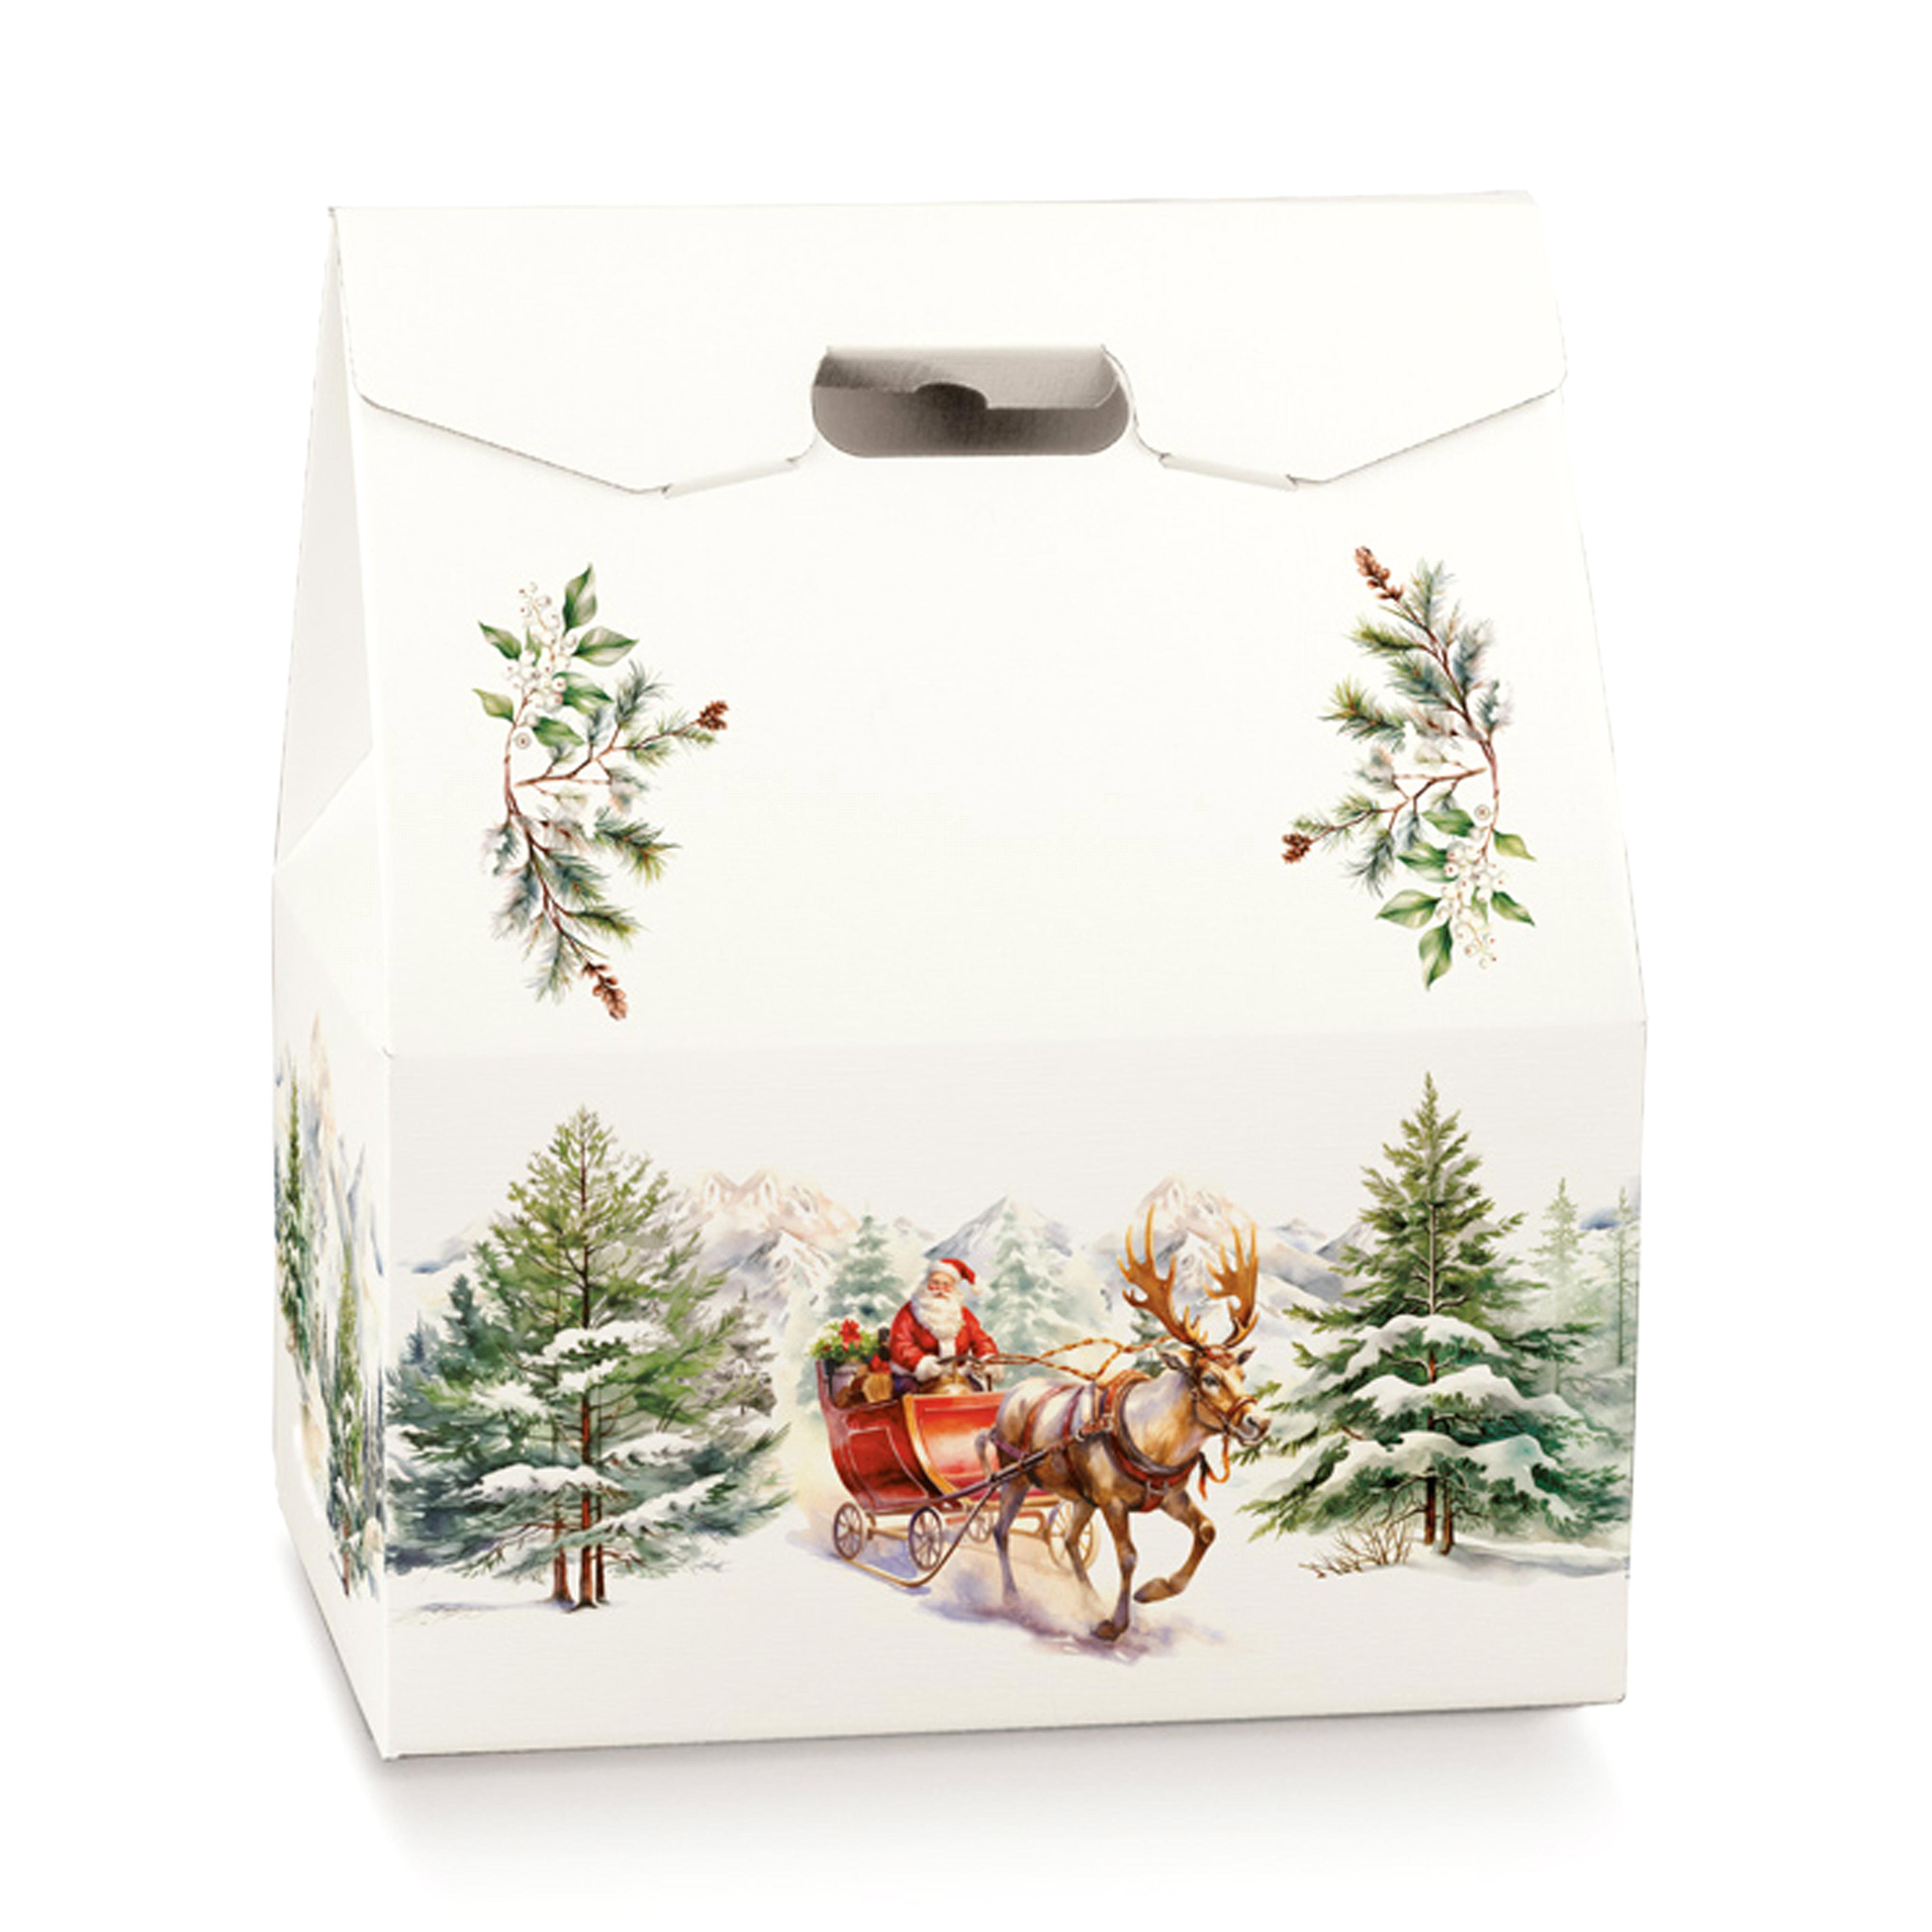 CHRISTMAS ITEMS, BOXES, BASKETS,DISHES, VARIOUS BAGS AND CONTAINERS, BAULOTTO 33X25X39 PAESAGGIO